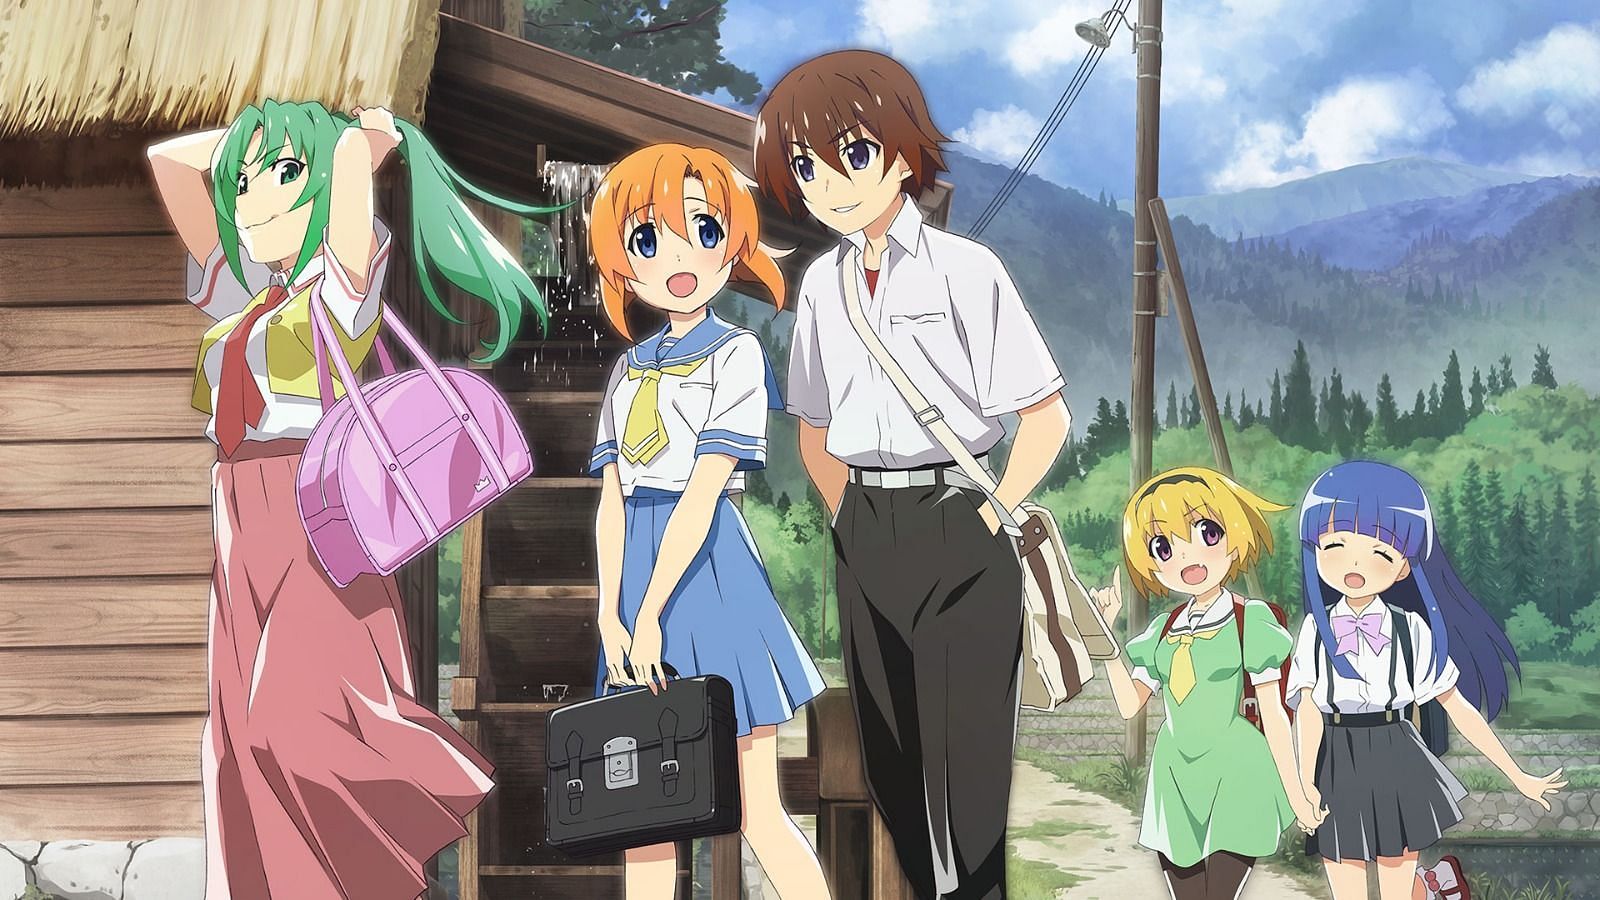 Characters appearing in Higurashi: When They Cry - Sotsu Anime